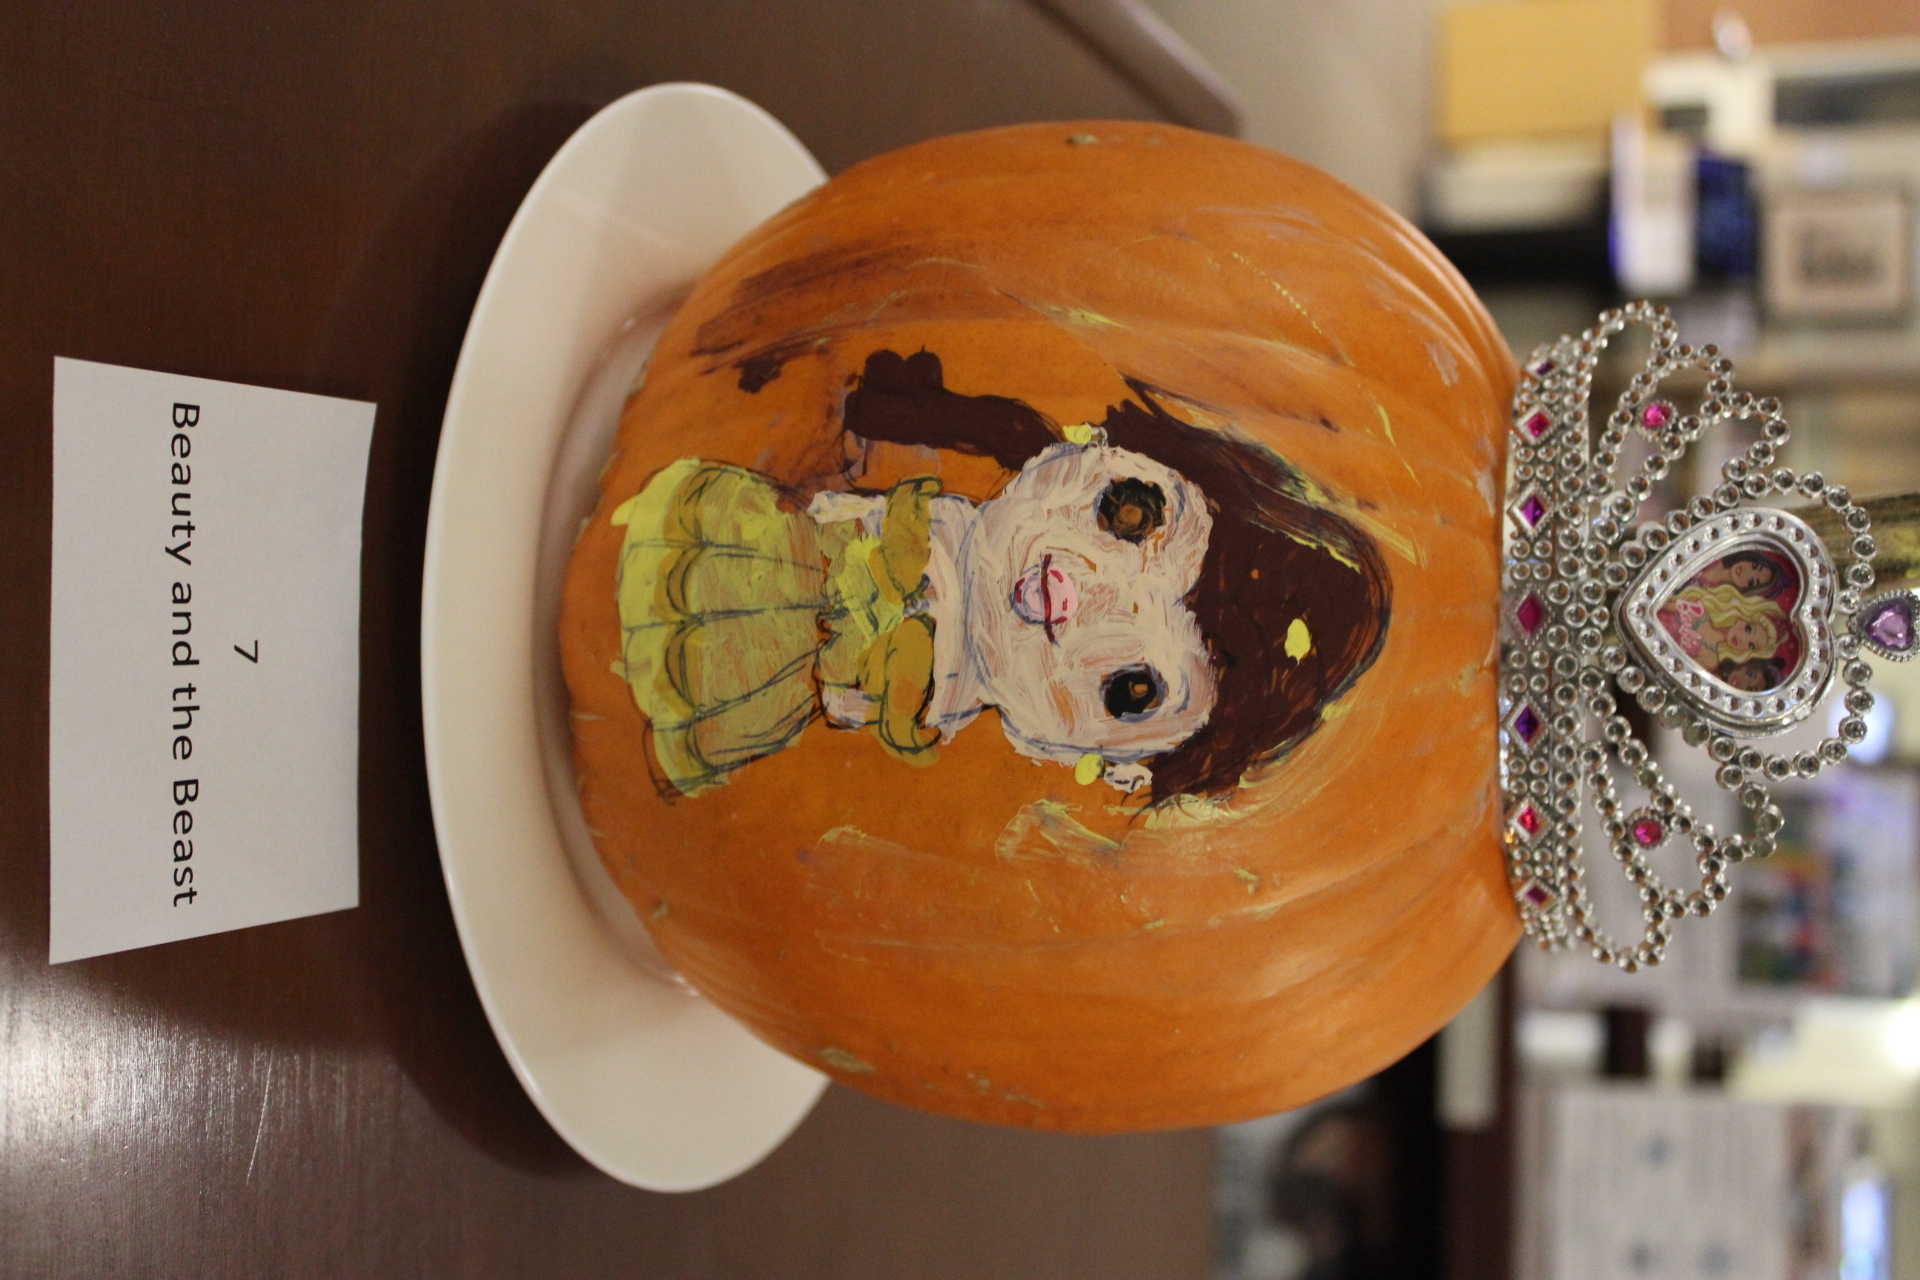 Pumpkin decorated as "Belle from Beauty and the Beast"